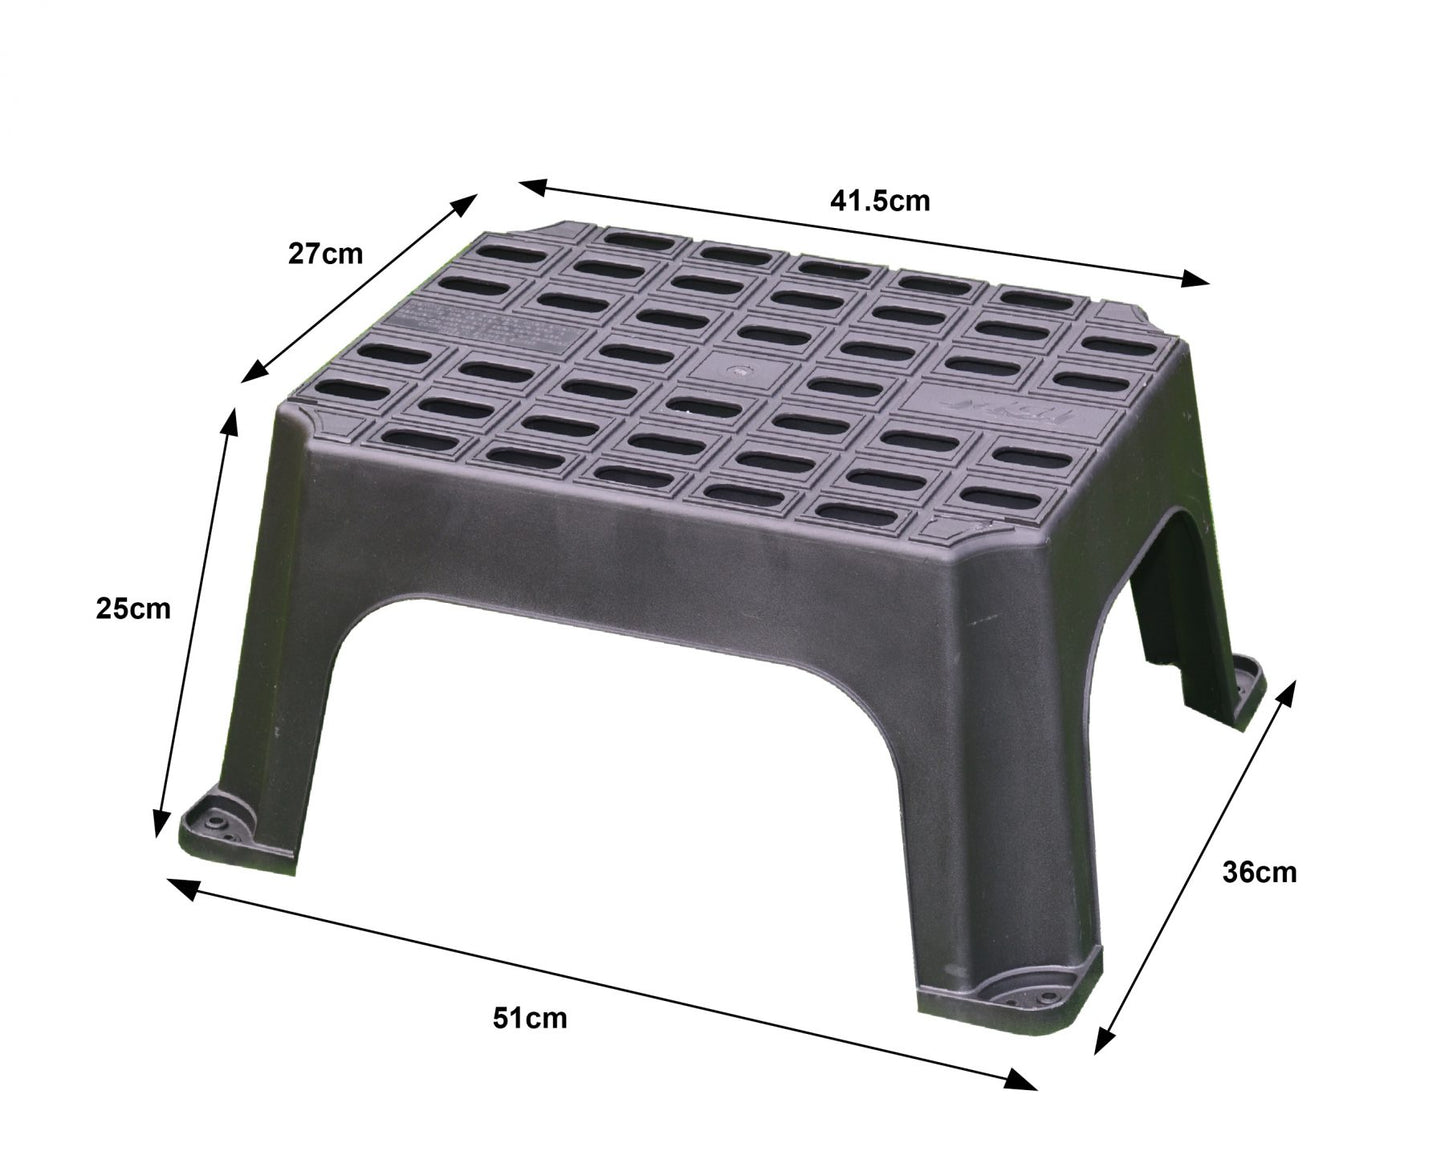 MGI Milenco Single Plastic Step - AVAILABLE IN STORE ONLY